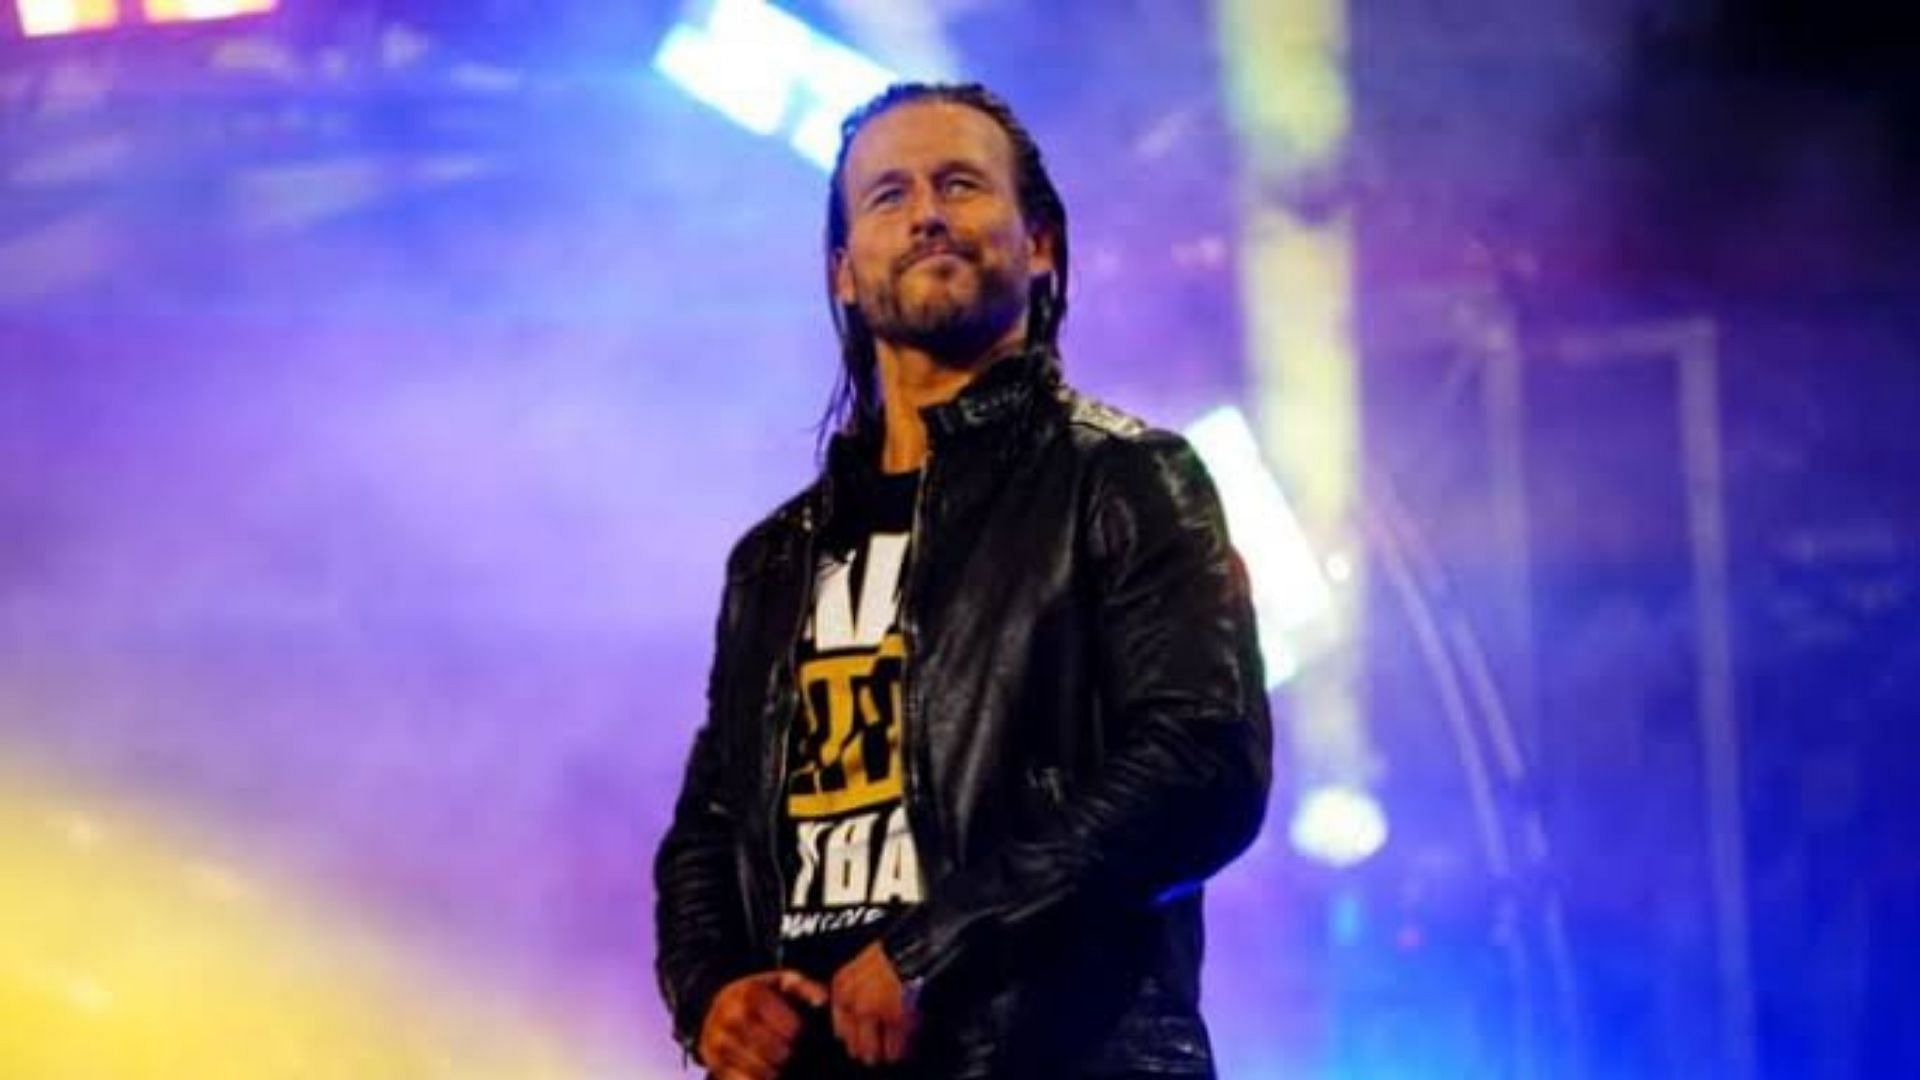 Adam Cole will challenge MJF for the AEW World Championship at All In.